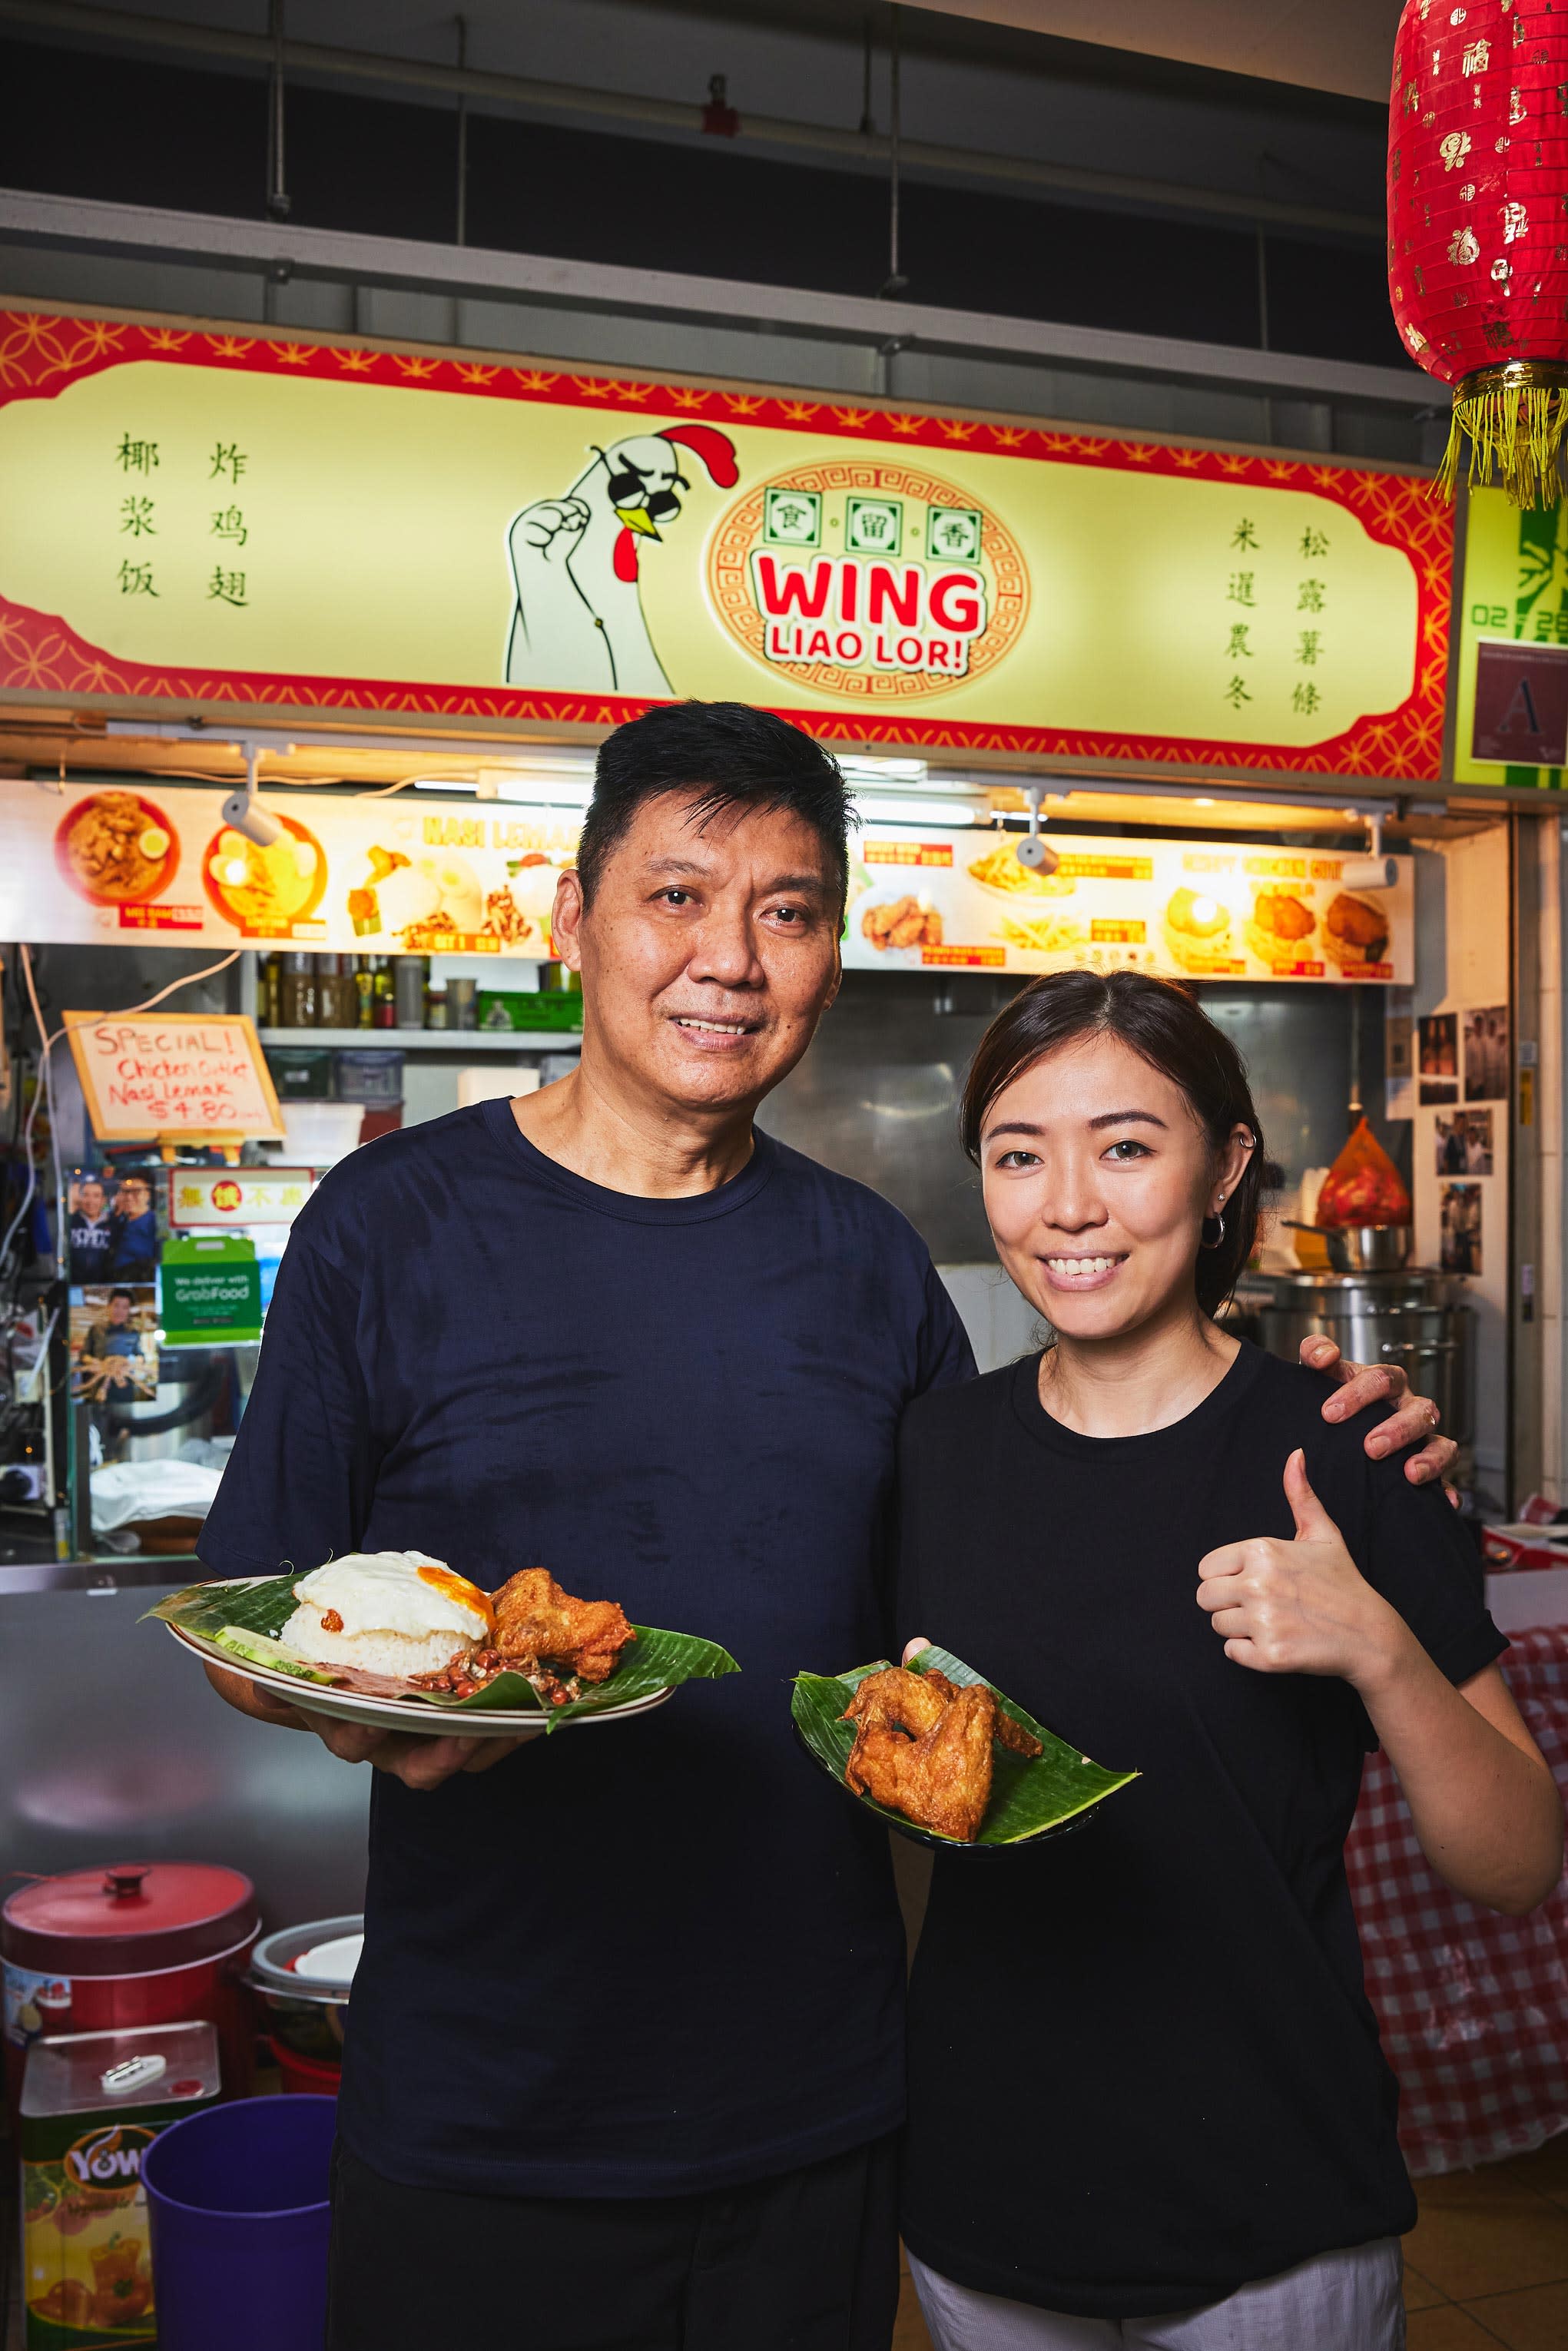 wing liao lor owners posing with dishes lv 1499 data